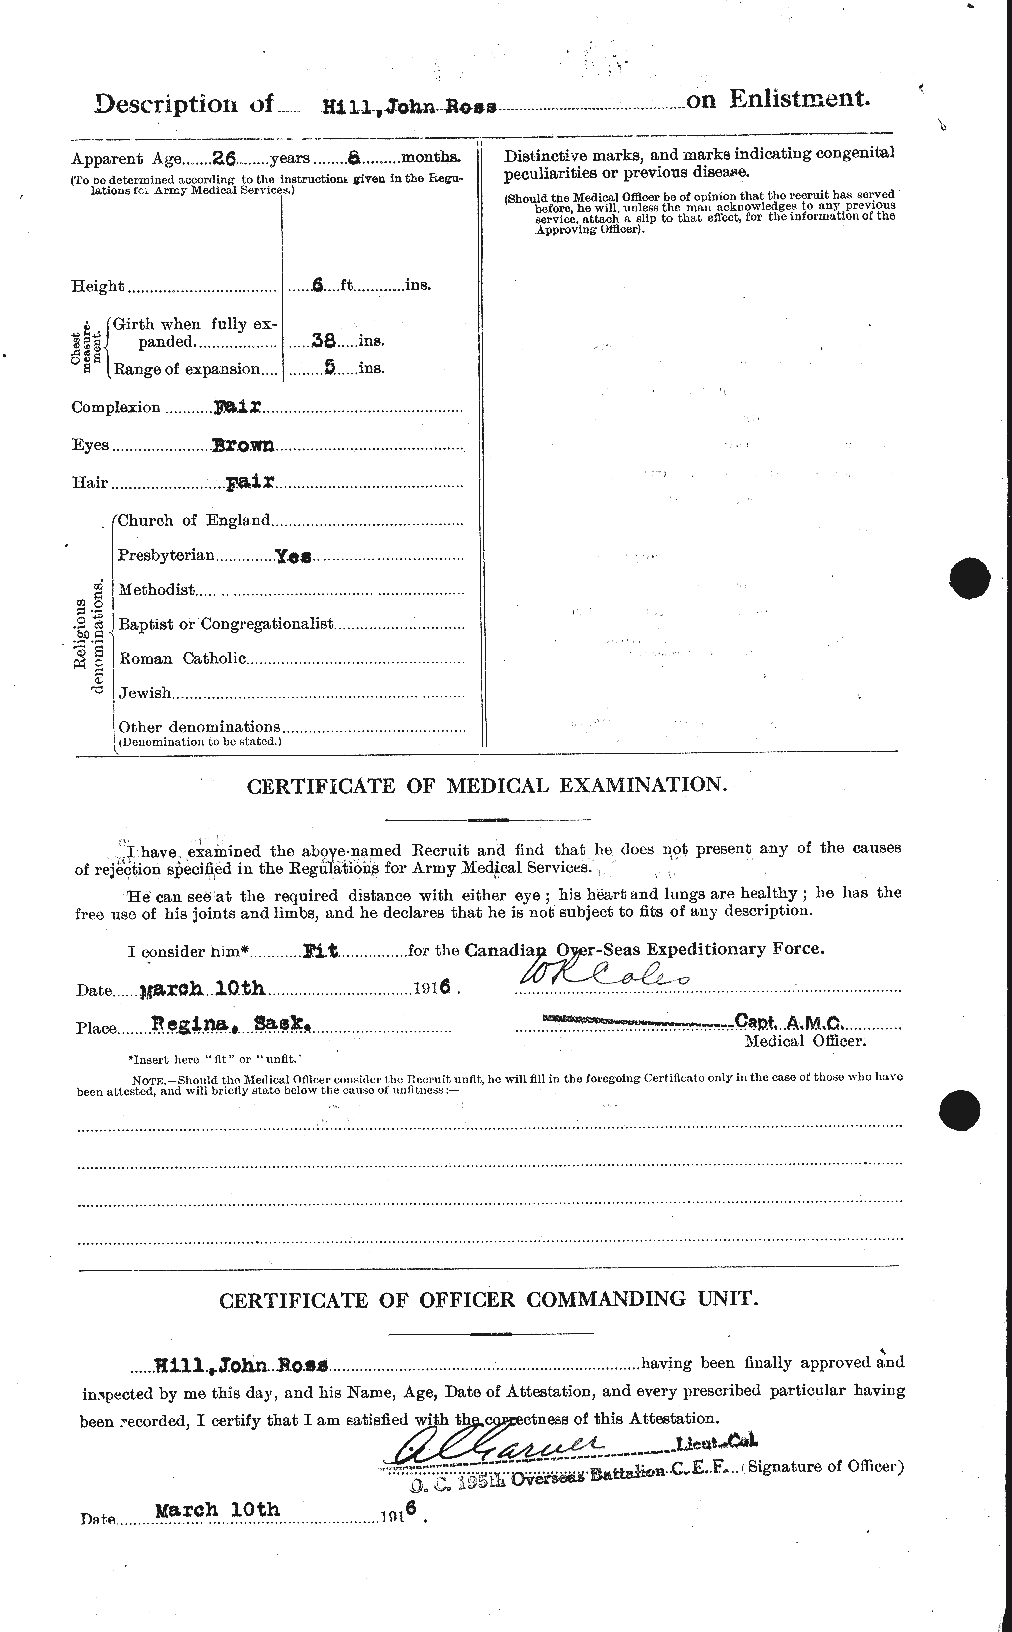 Personnel Records of the First World War - CEF 398790b